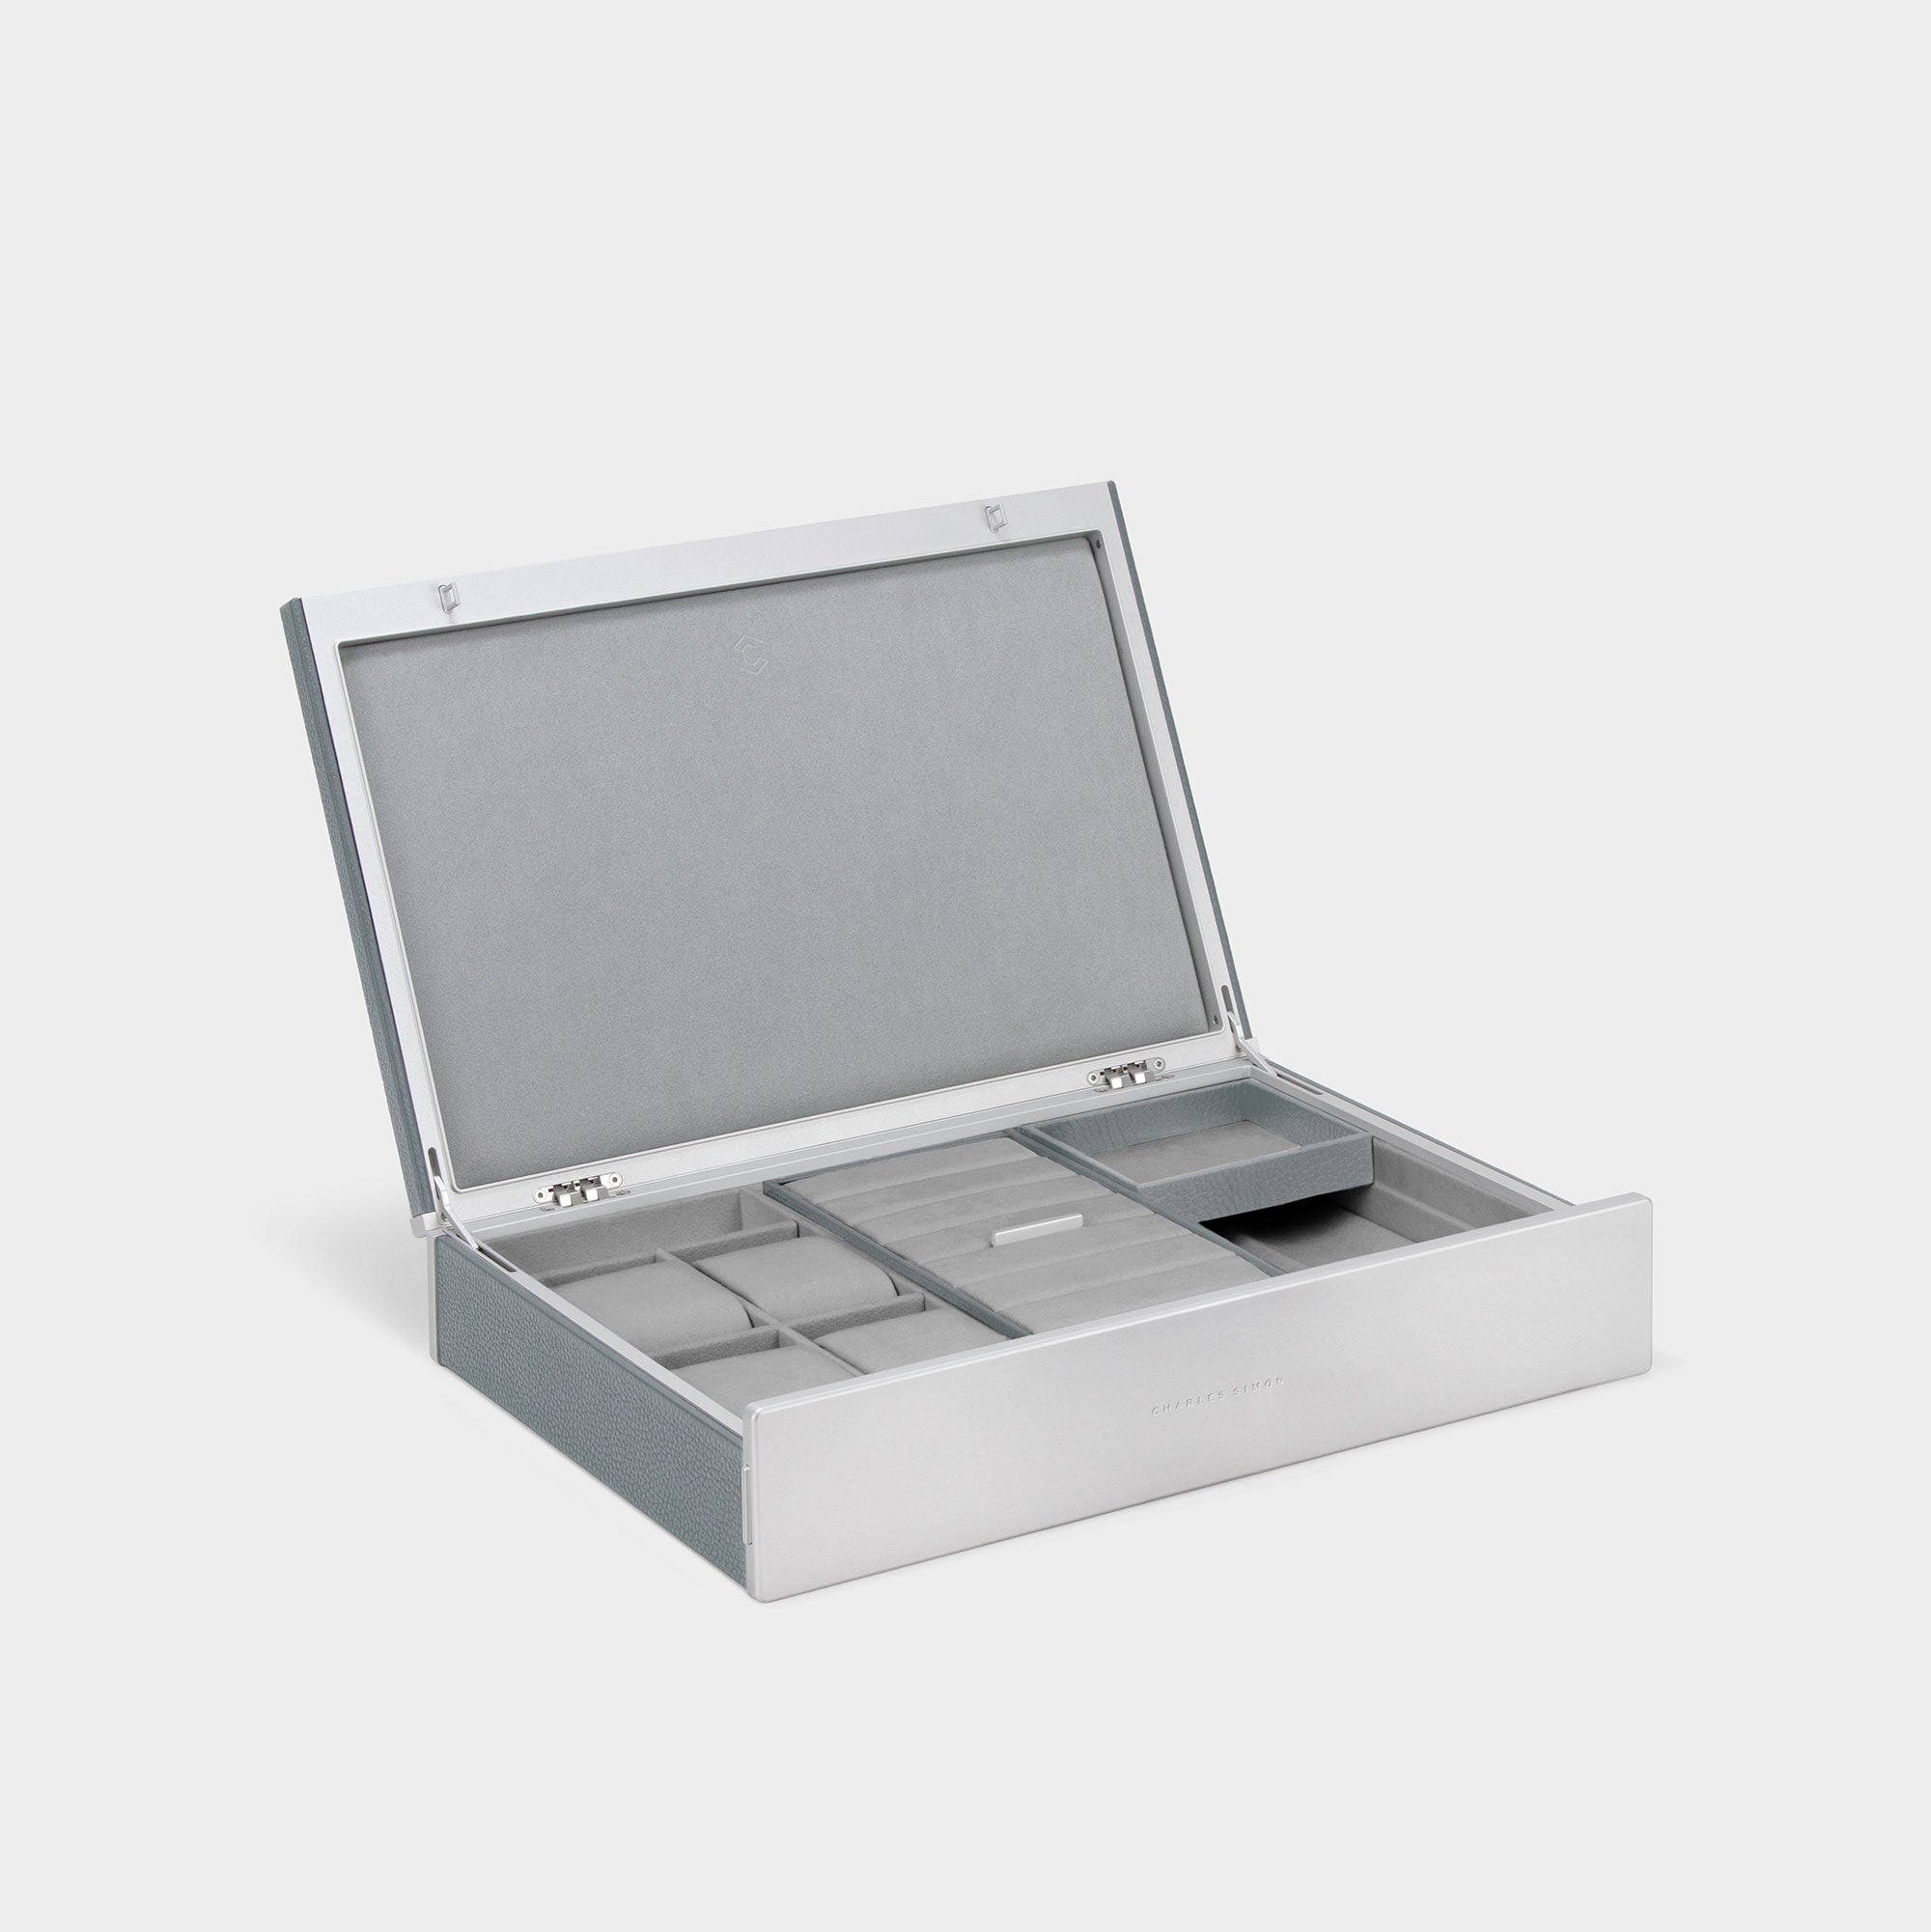 Product photo of open Taylor 4 Watch and Jewelry box in cloud grey leather and fog grey interior. Handmade watch and jewelry storage featuring room for 4 watches and removable compartments and trays for necklaces, bracelets, rings and earrings.